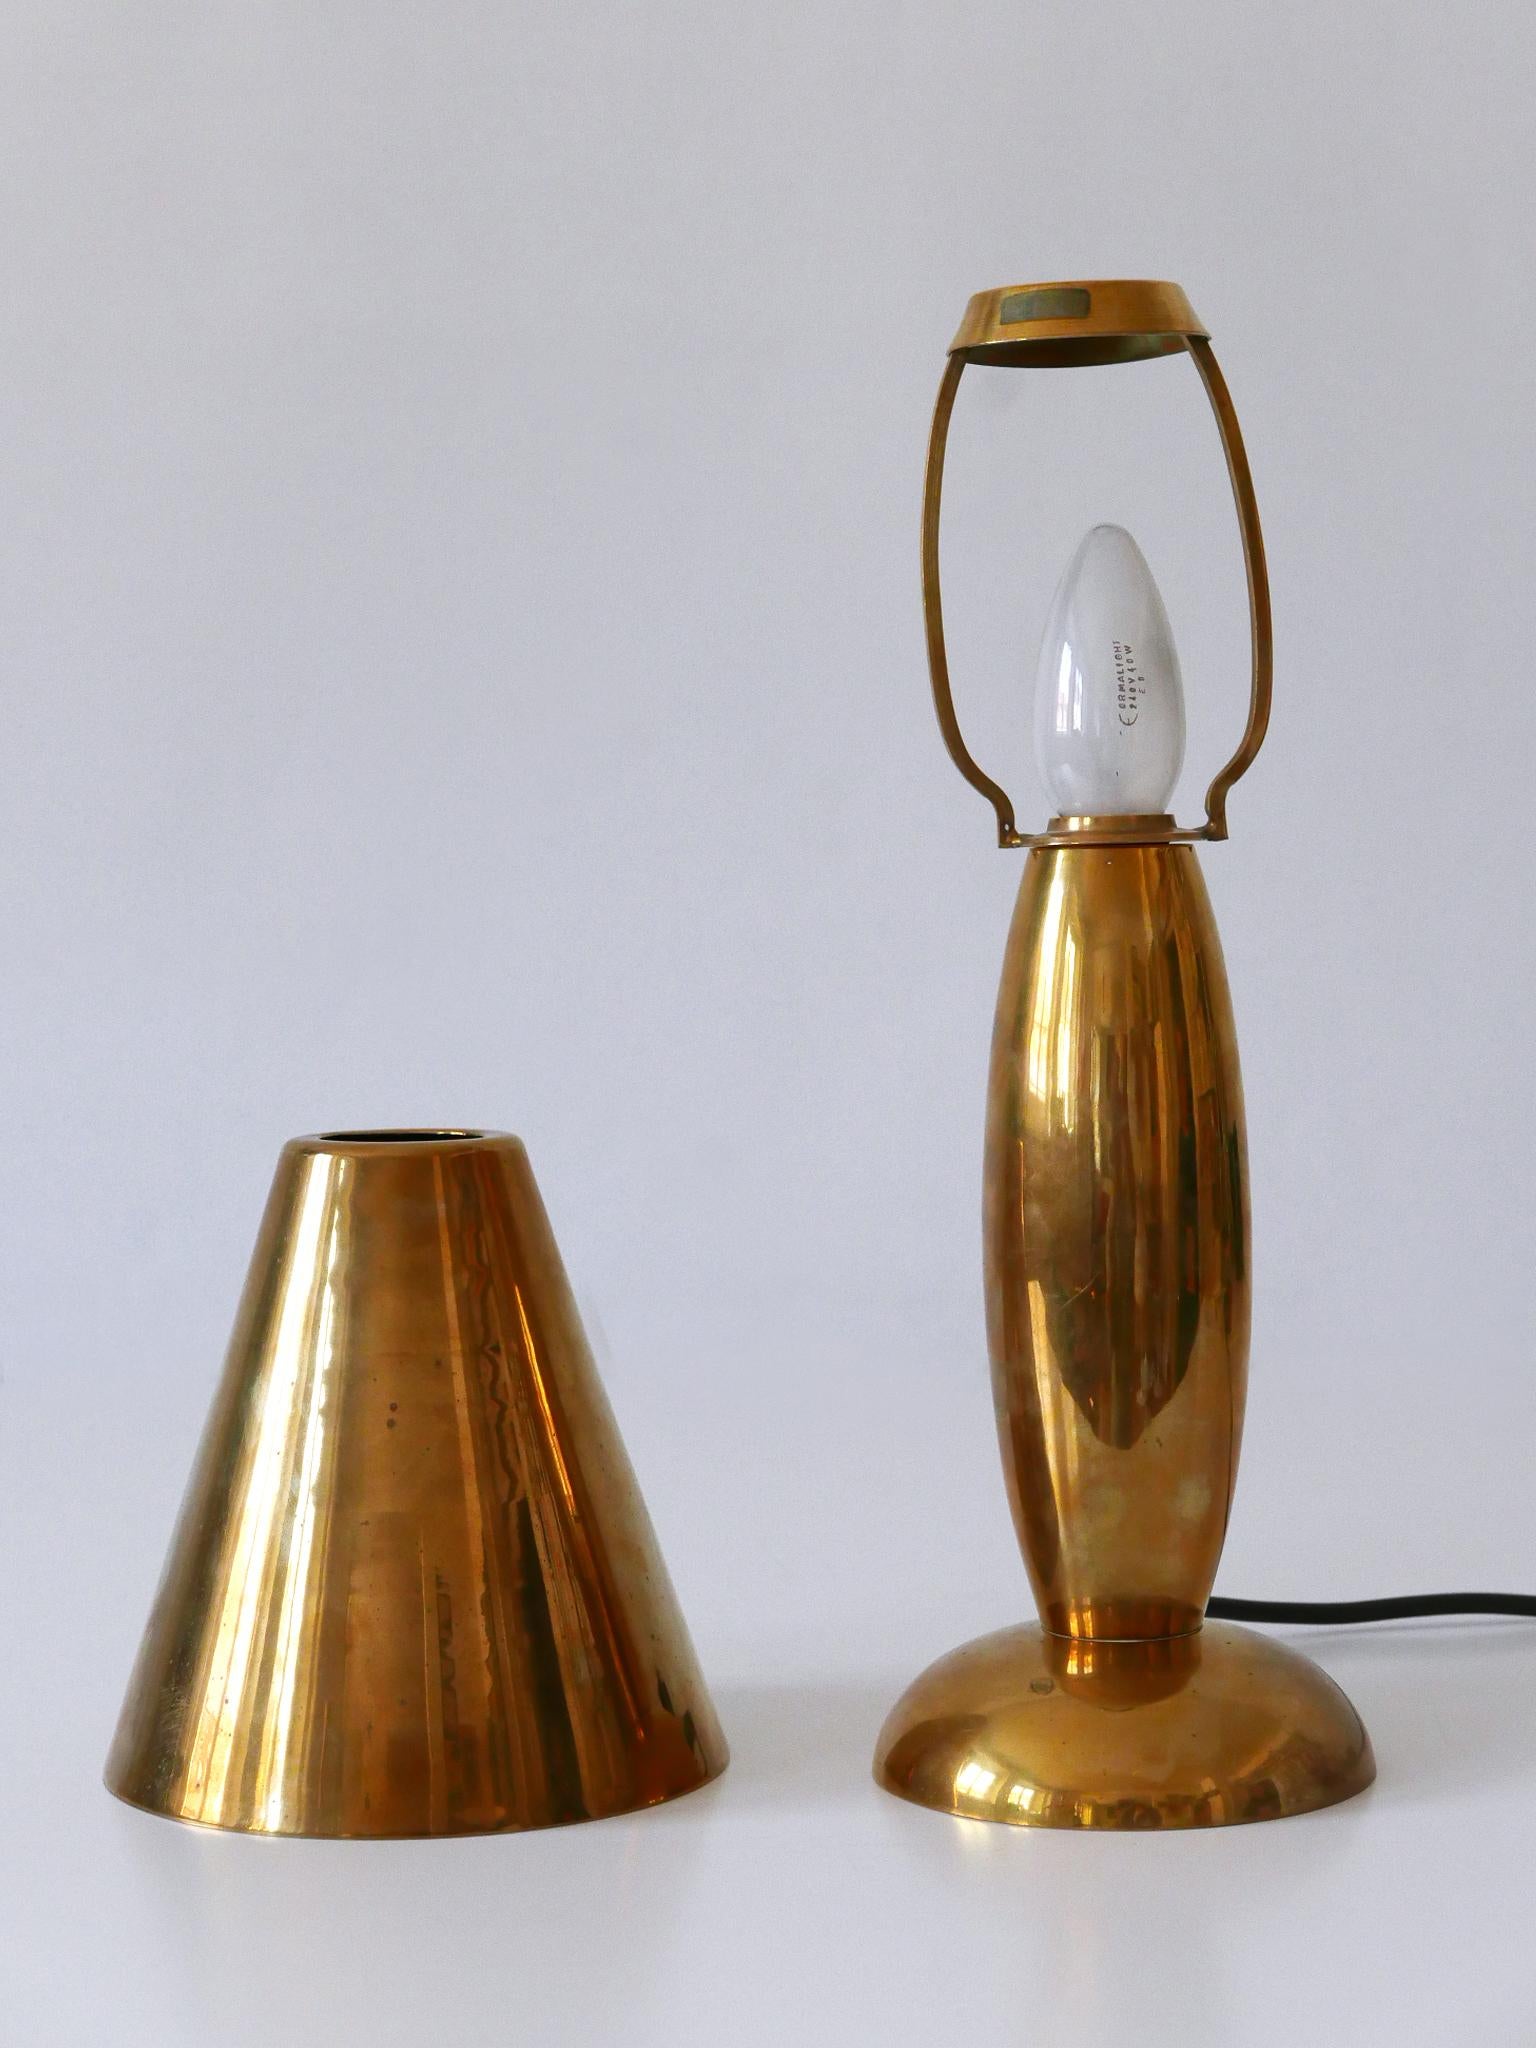 Rare & Lovely Mid-Century Modern Brass Side Table Lamp by Lambert Germany 1970s For Sale 13